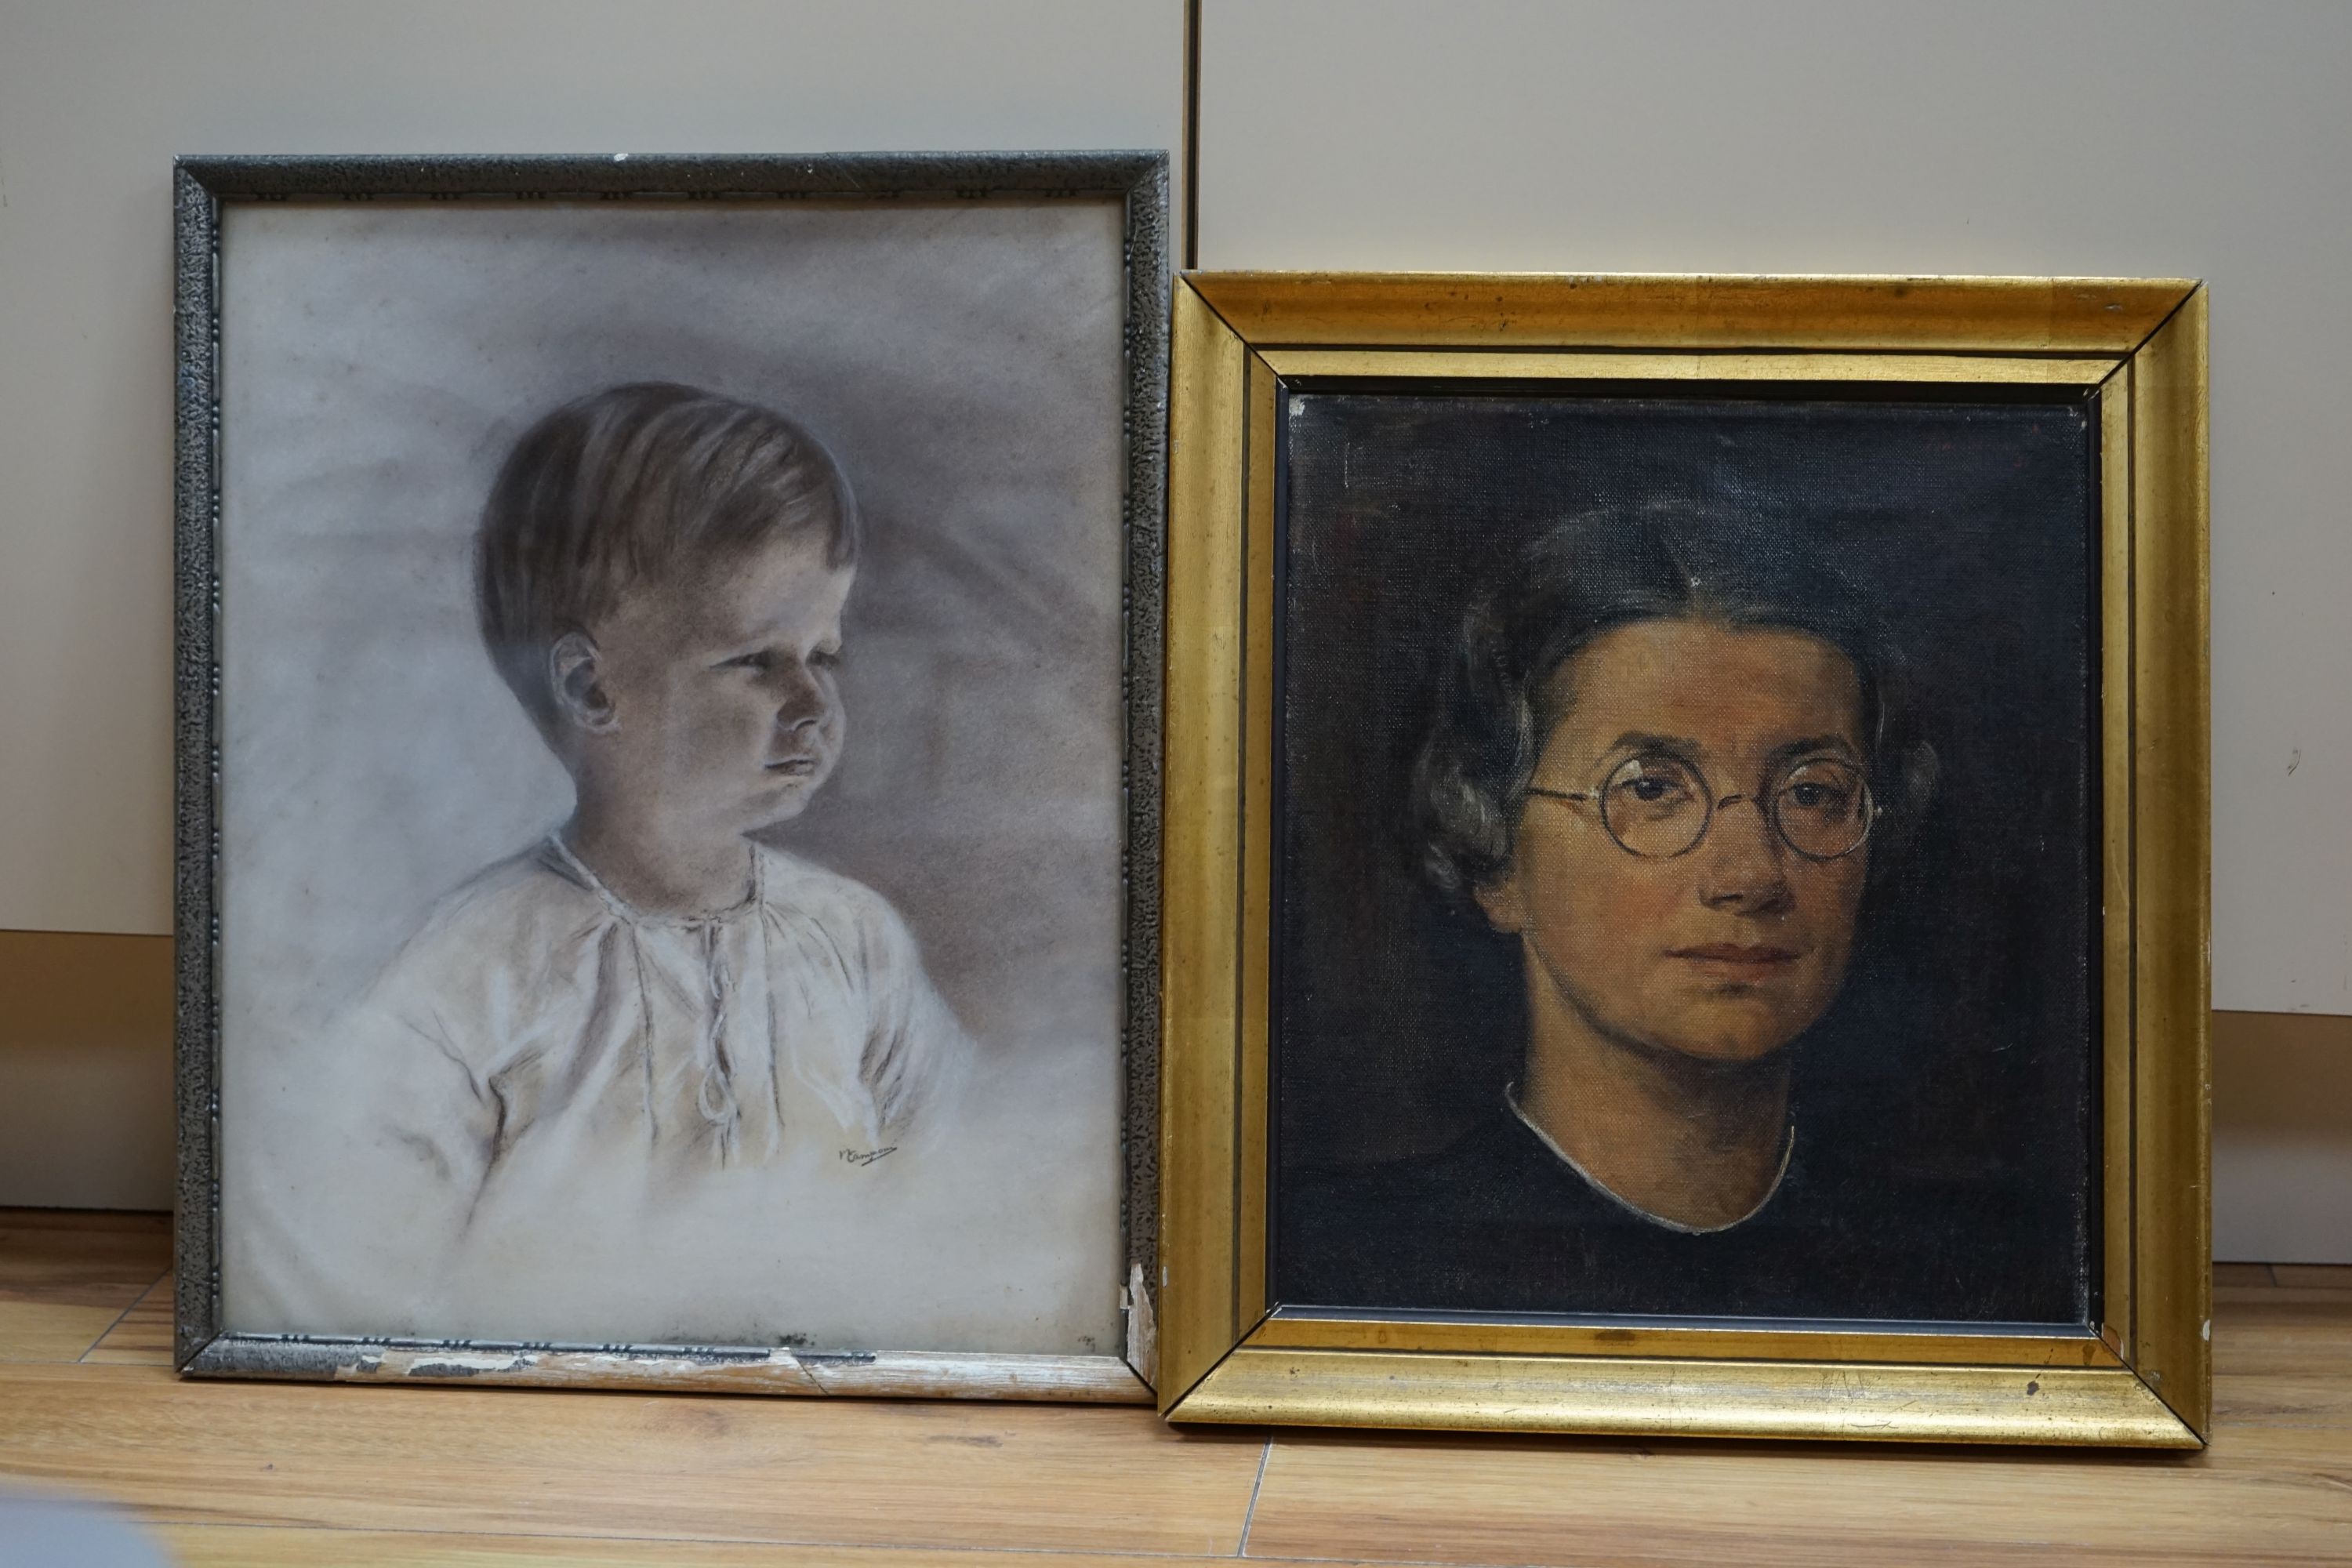 Dutch School (20th century), oil on canvas, Head and shoulder portrait of W. de Villeneuve Mees, indistinctly signed and dated 1938, 34 x 30cm and a chalk drawing of a young boy, signed 'Camponi' (2), 34 x 29cm